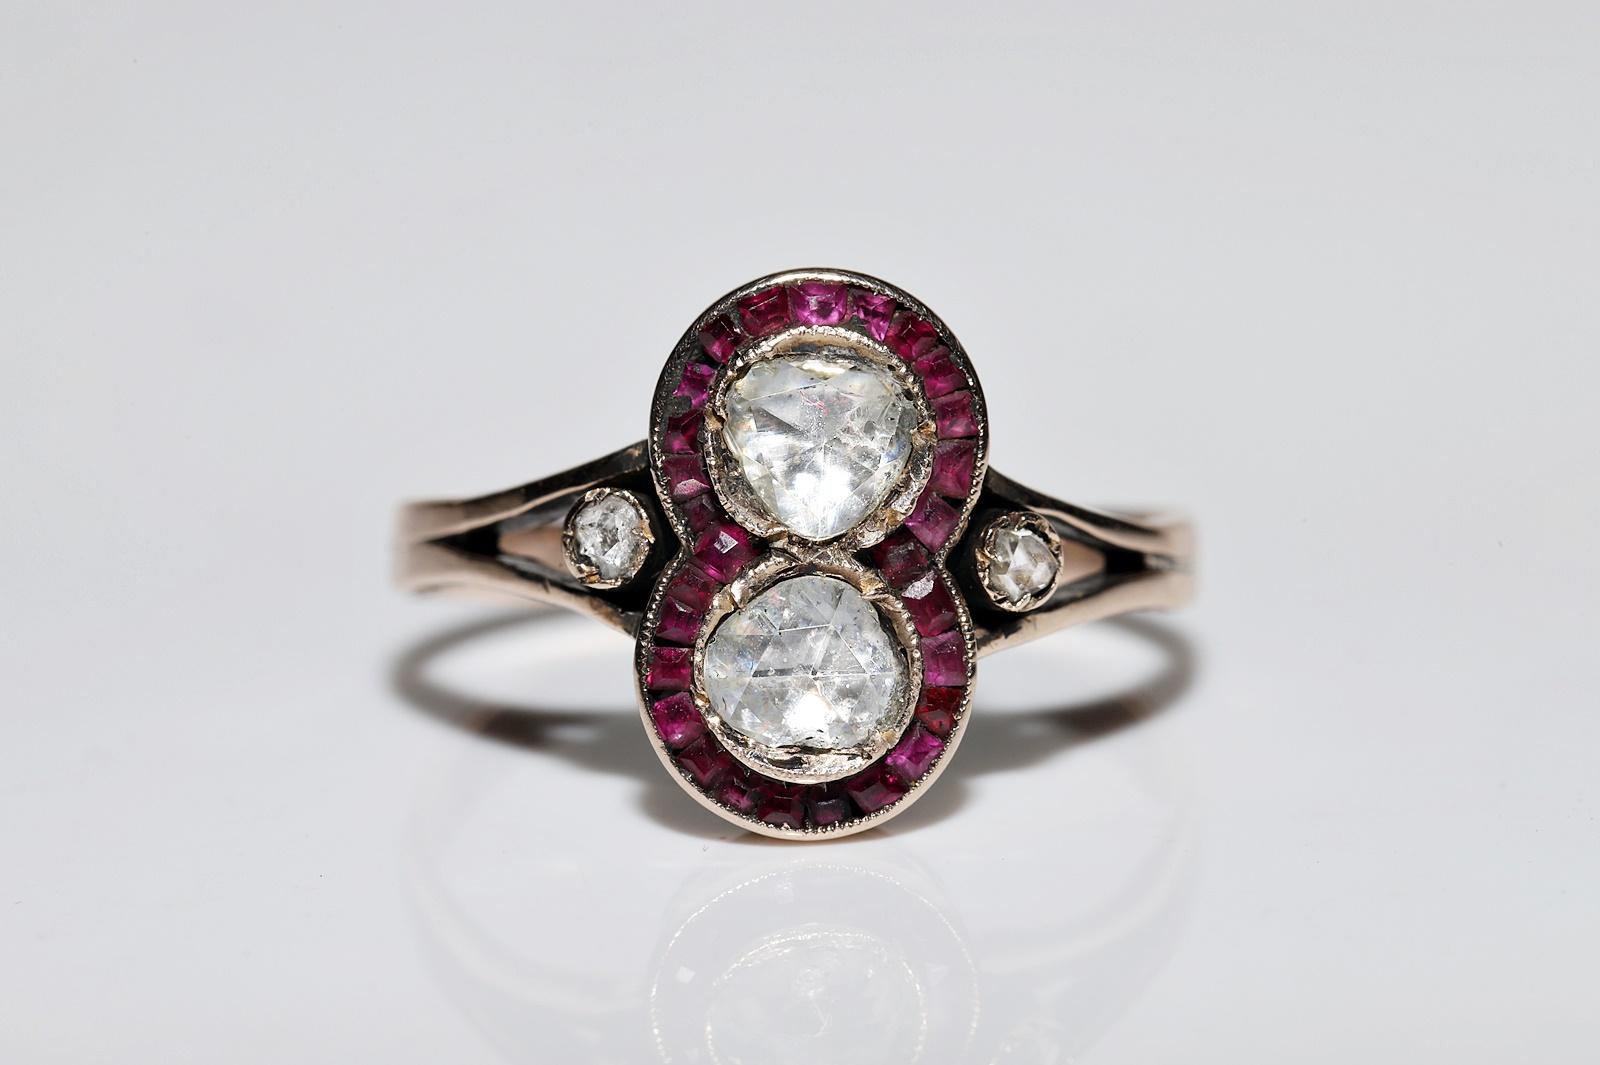 Antique Circa 1900s 10k Gold Natural Rose Cut Diamond And Caliber Ruby Ring For Sale 4